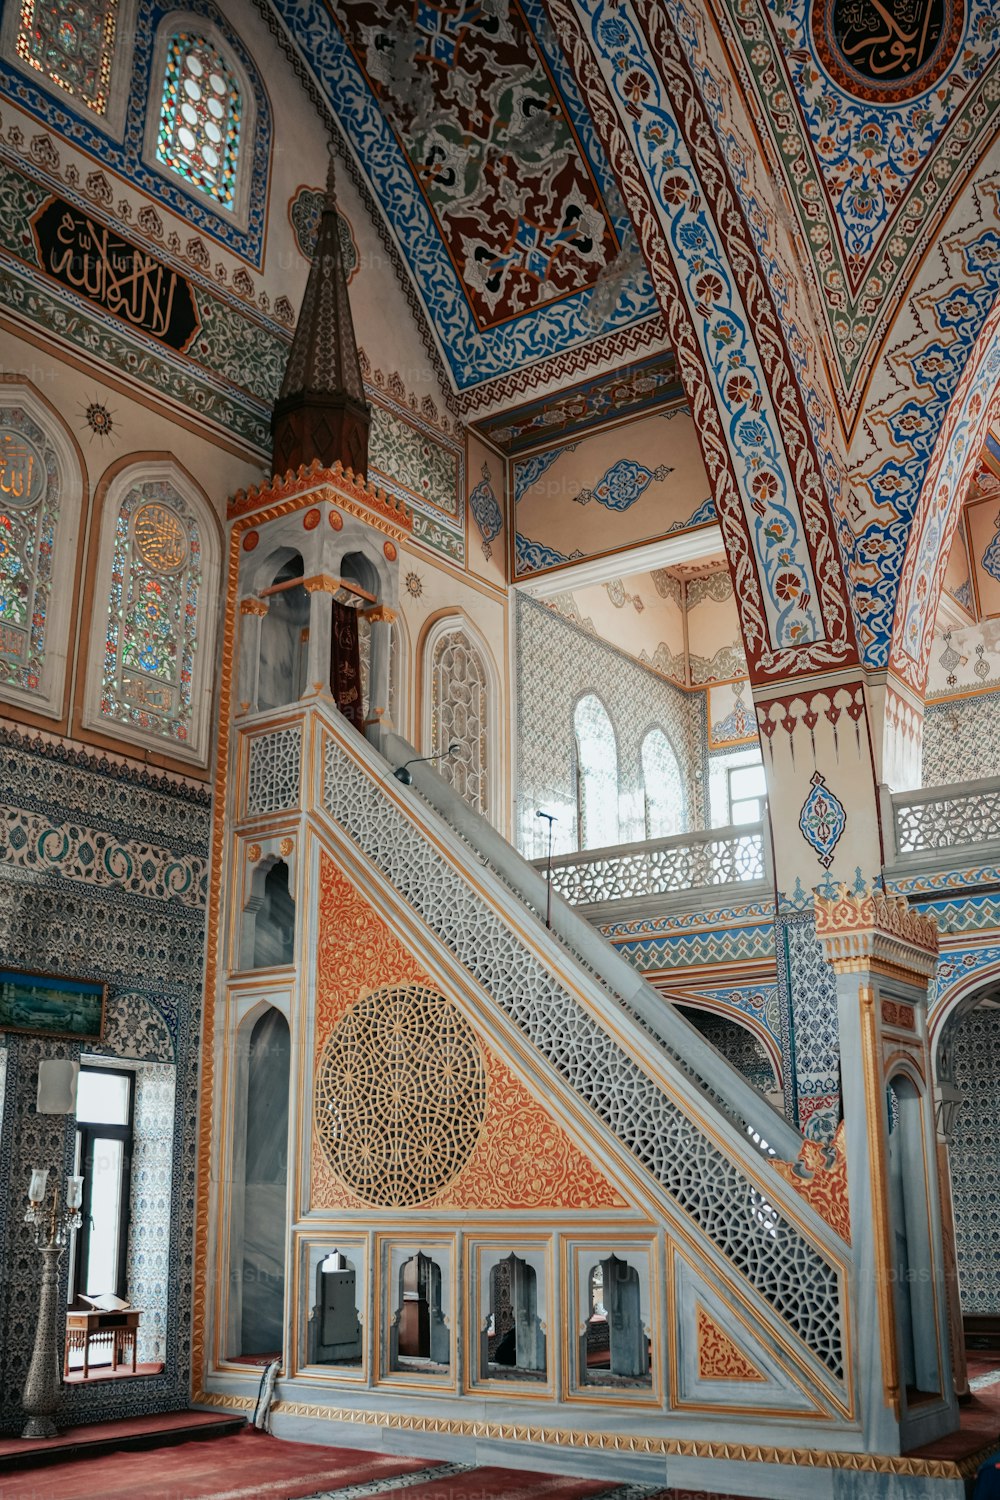 a staircase inside of a building with intricate designs